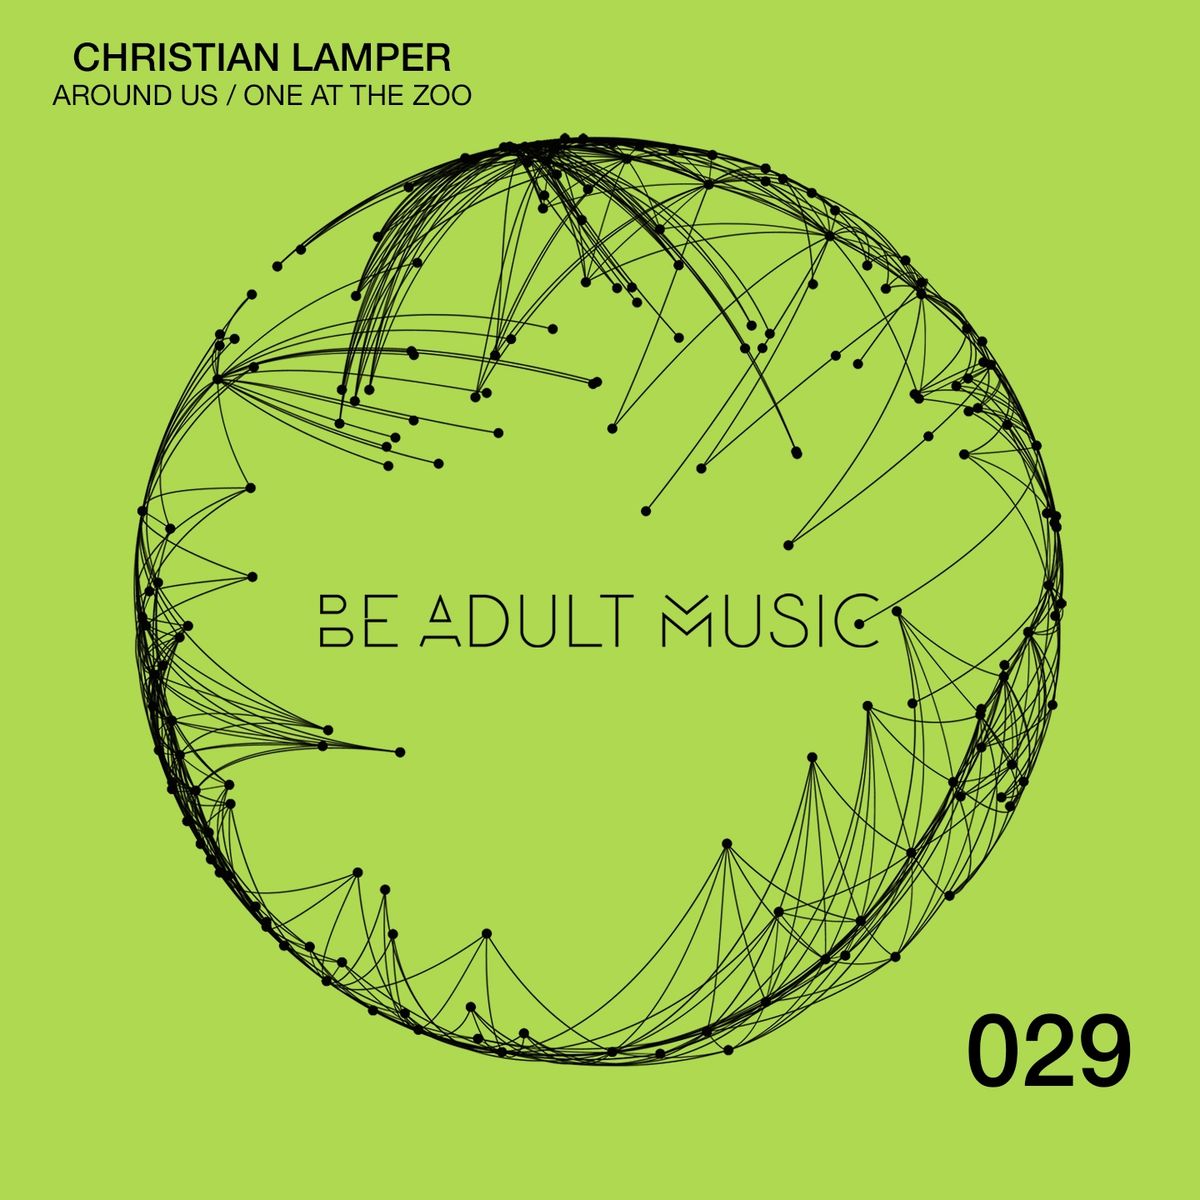 Christian Lamper - Around Us / One at the Zoo / Be Adult Music